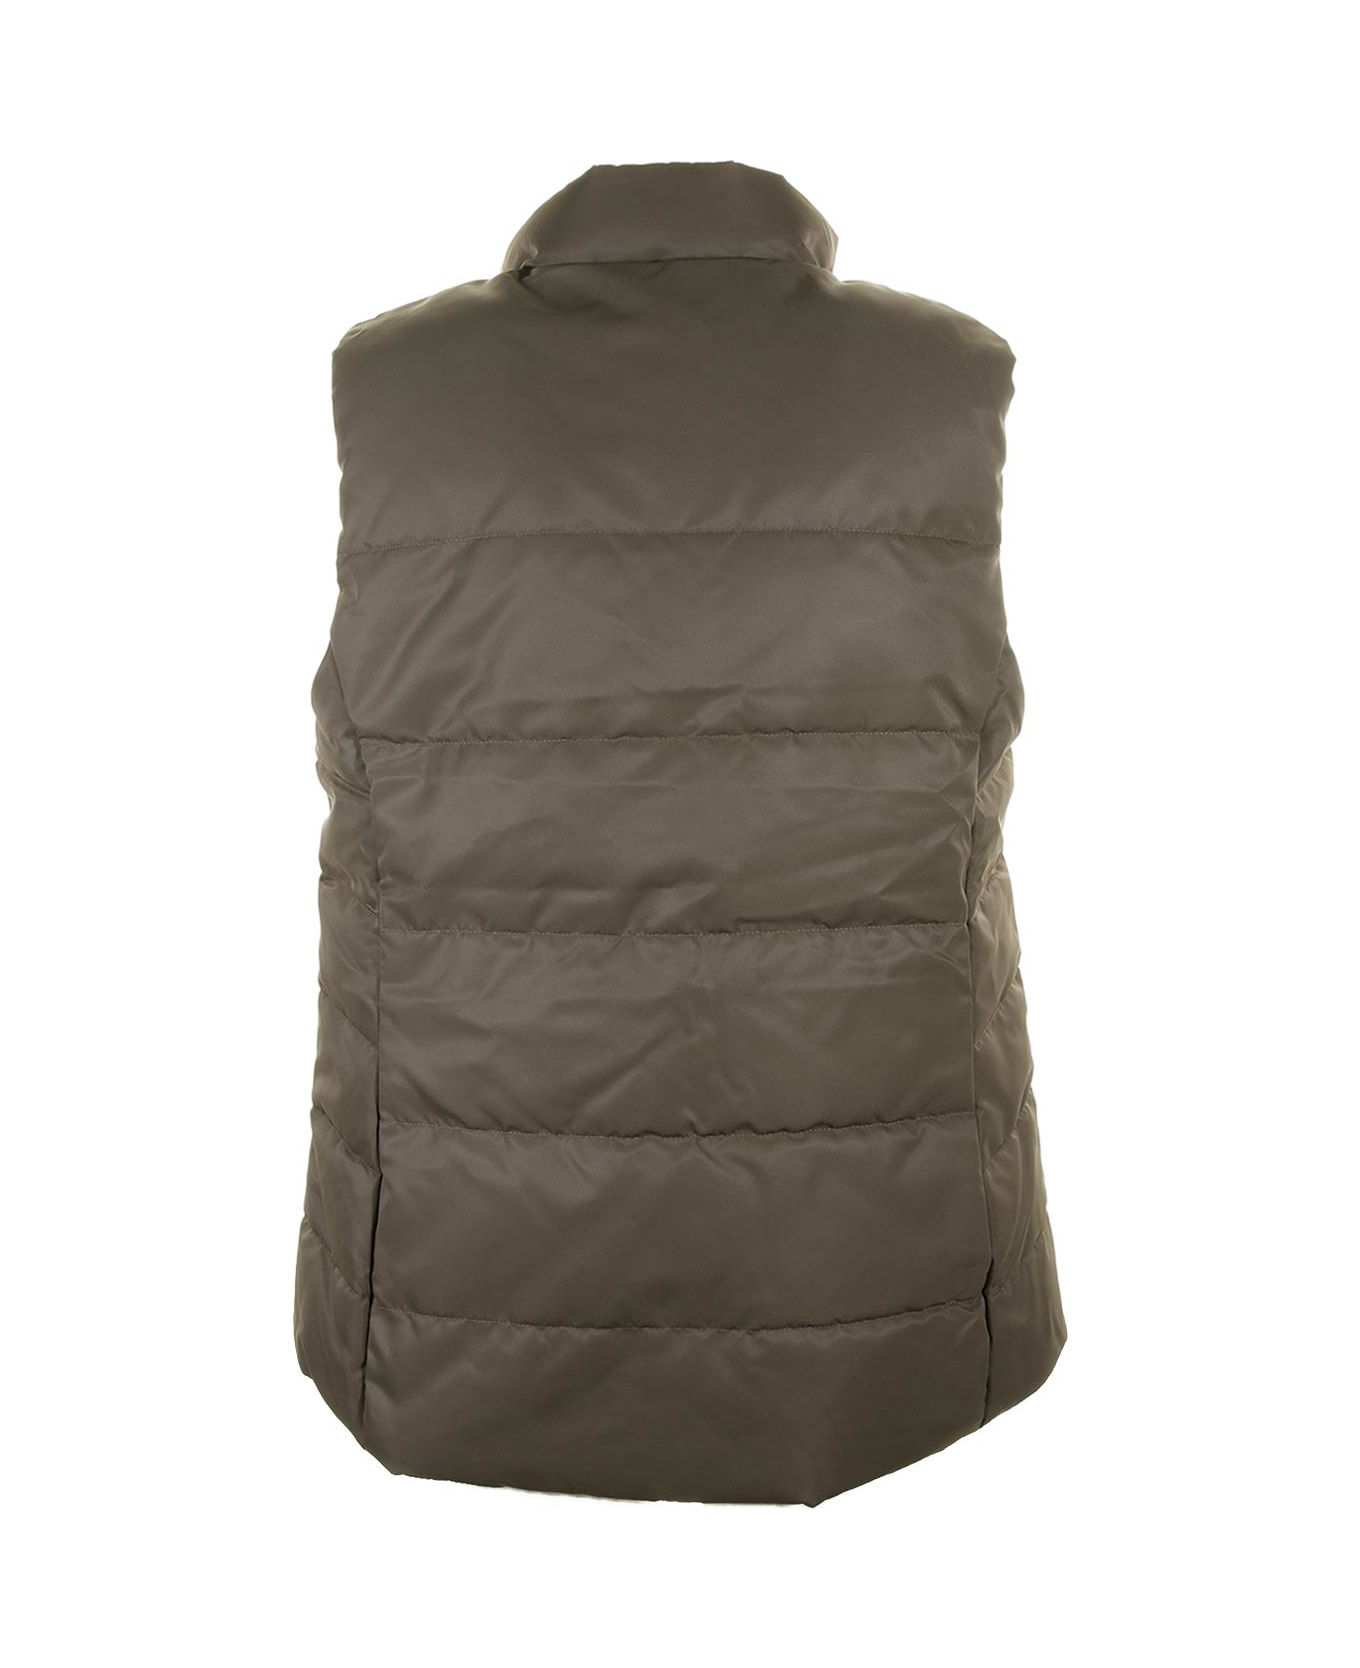 Canada Goose Women's Quilted Sleeveless Jacket - QUICK SAND